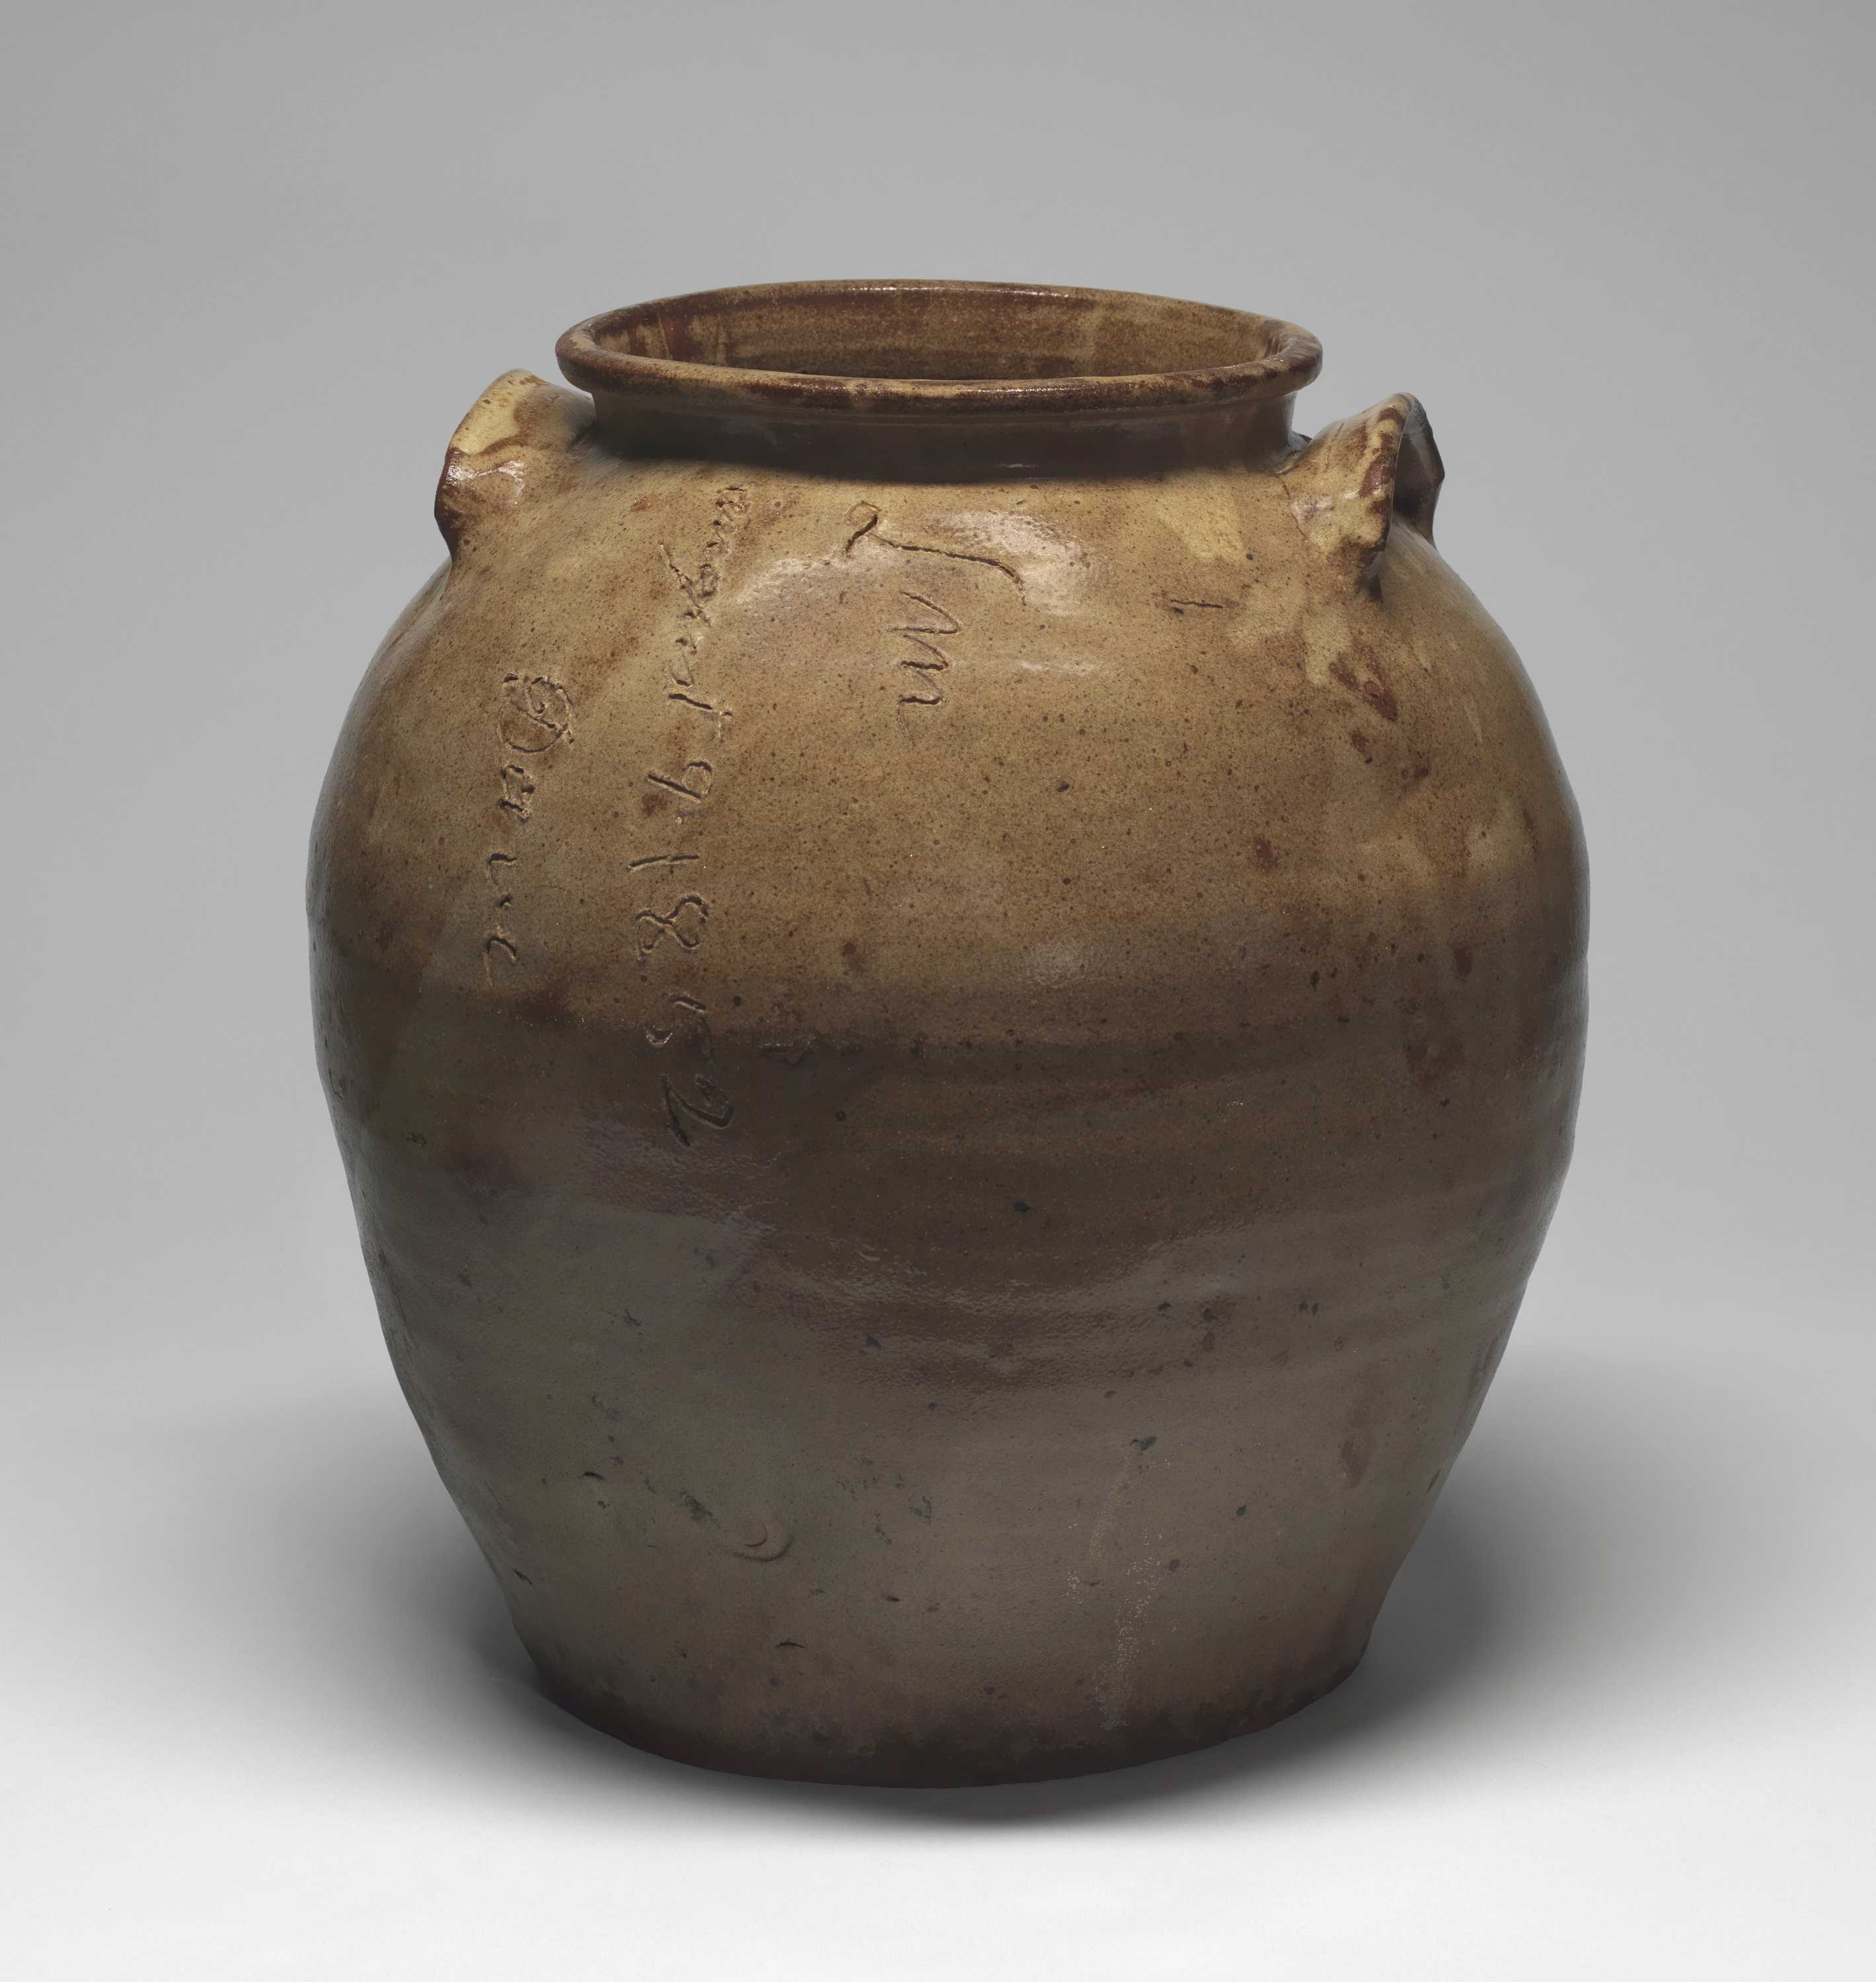 Brown colored jar with two small handles on the upper portion of body near rim. Signed and dated by artist vertically at upper body.